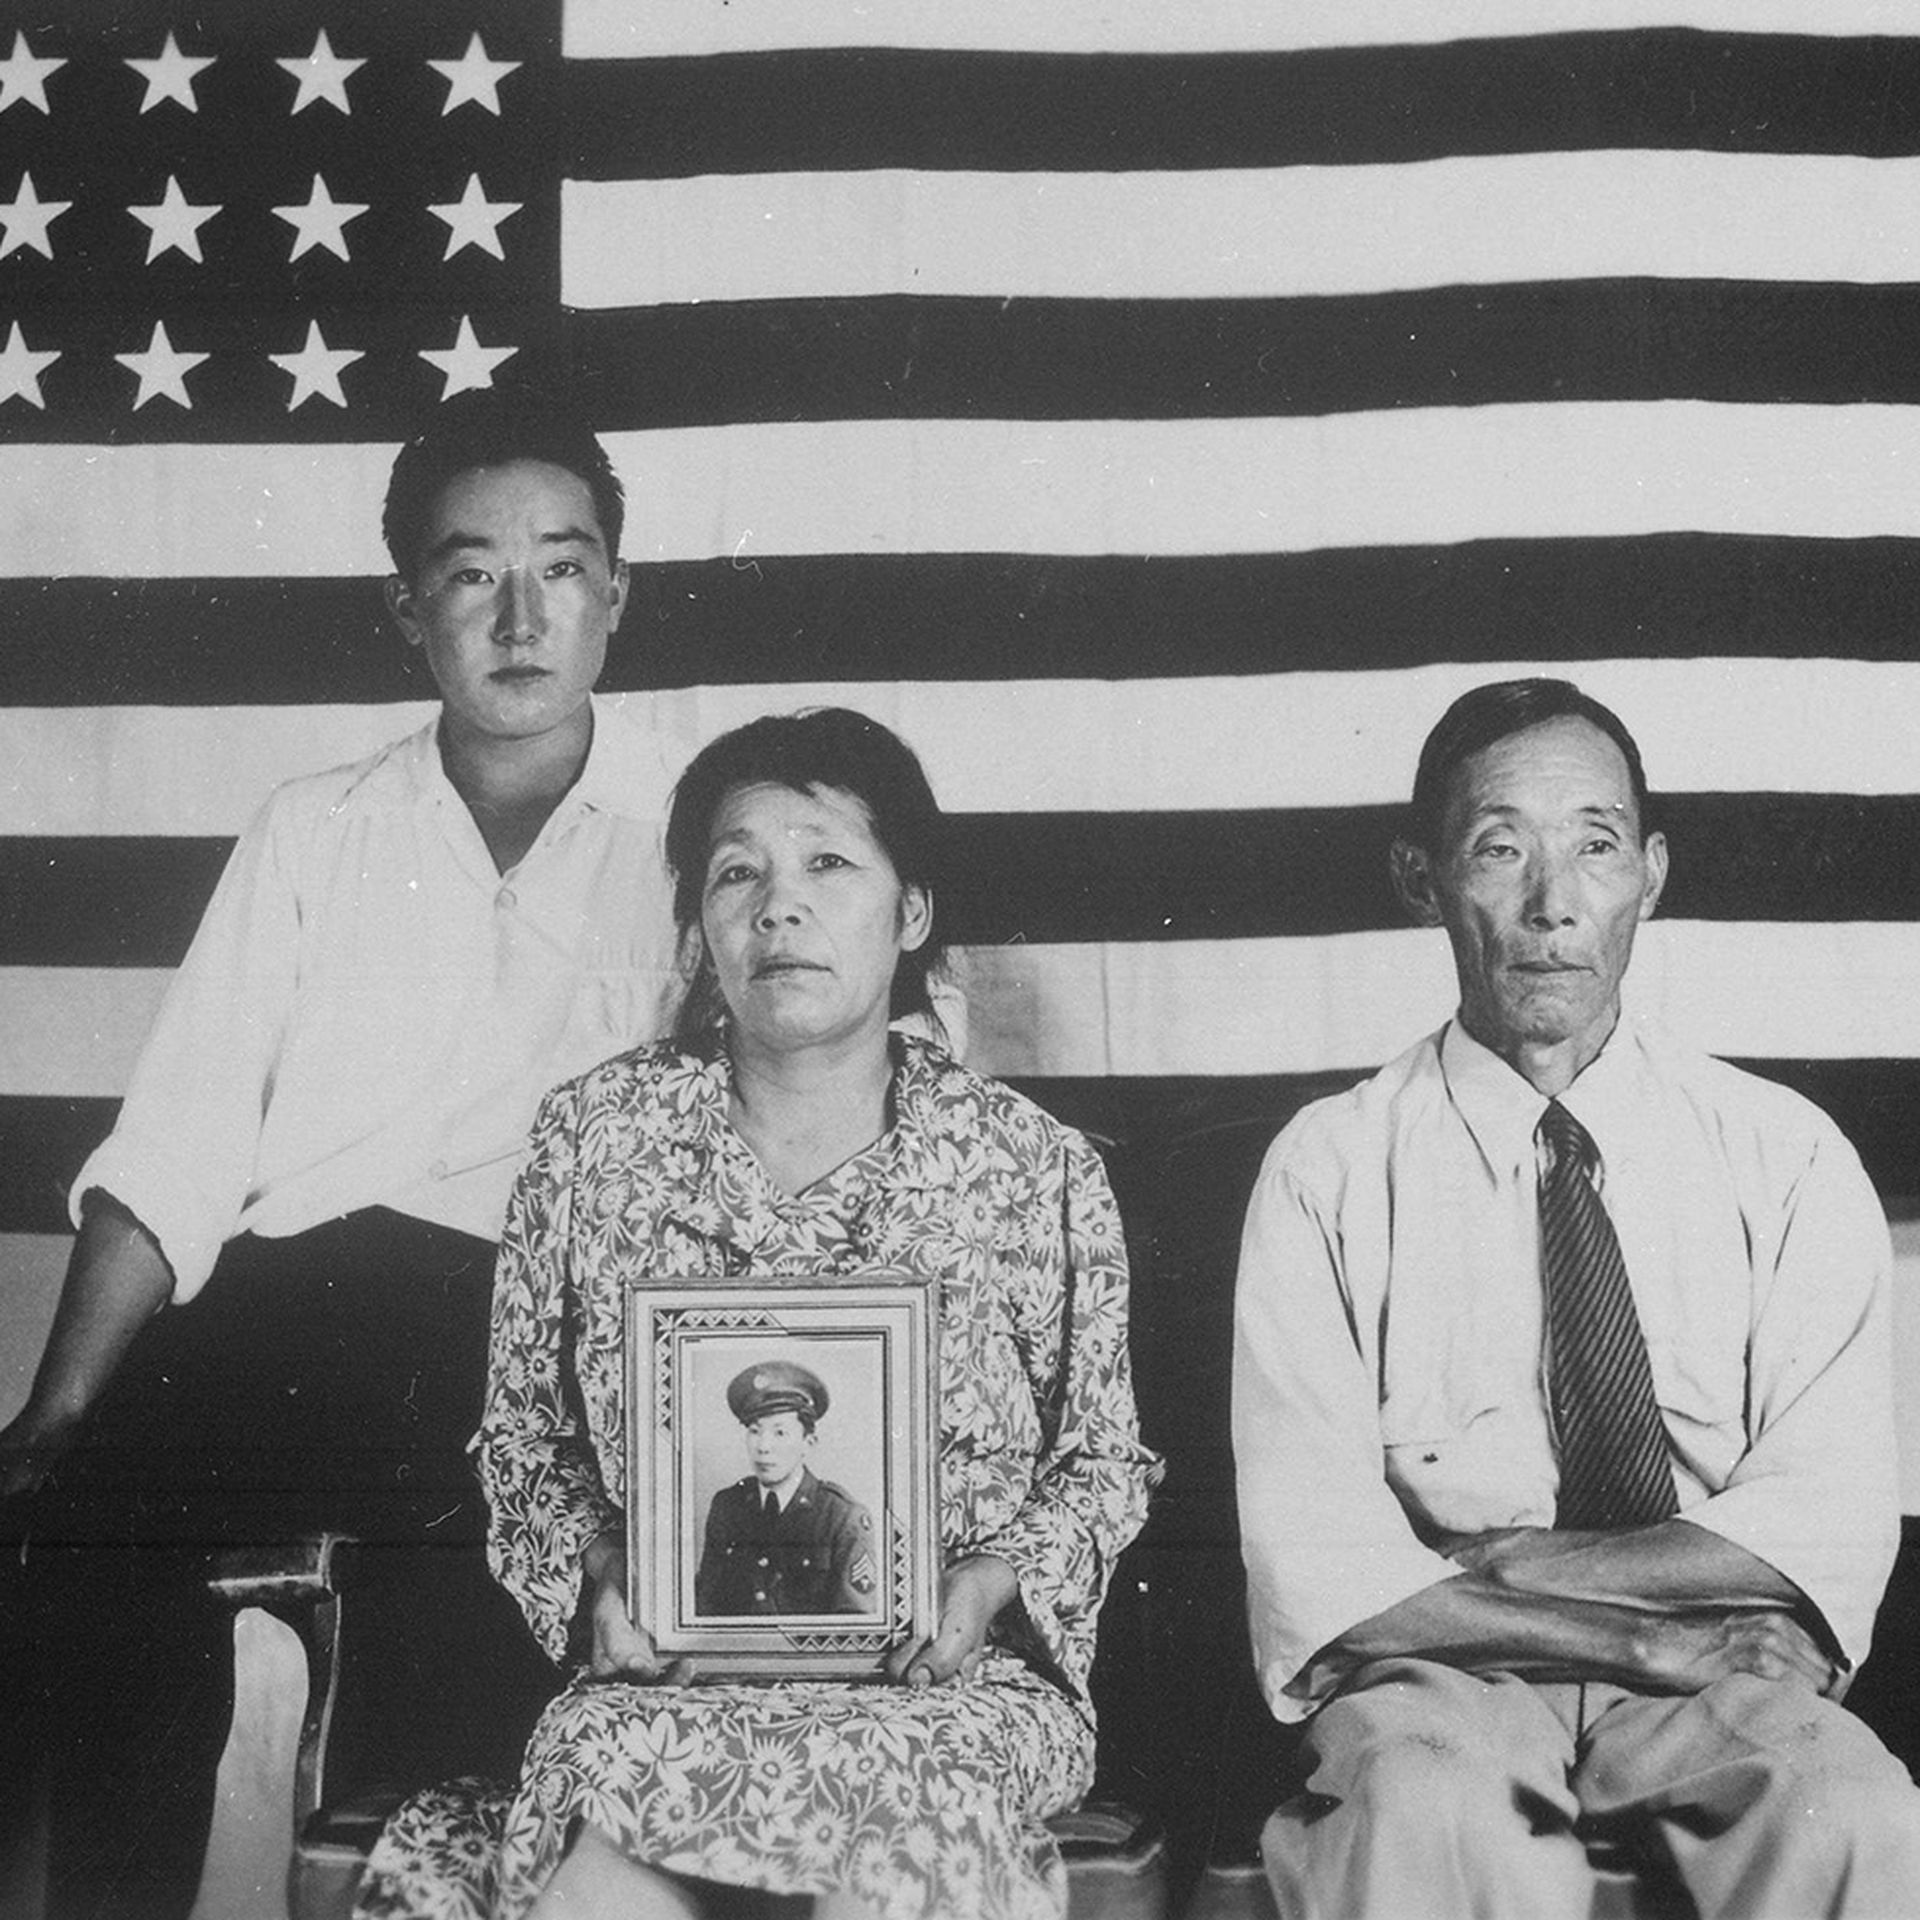 A family of three sits in front of the American flag